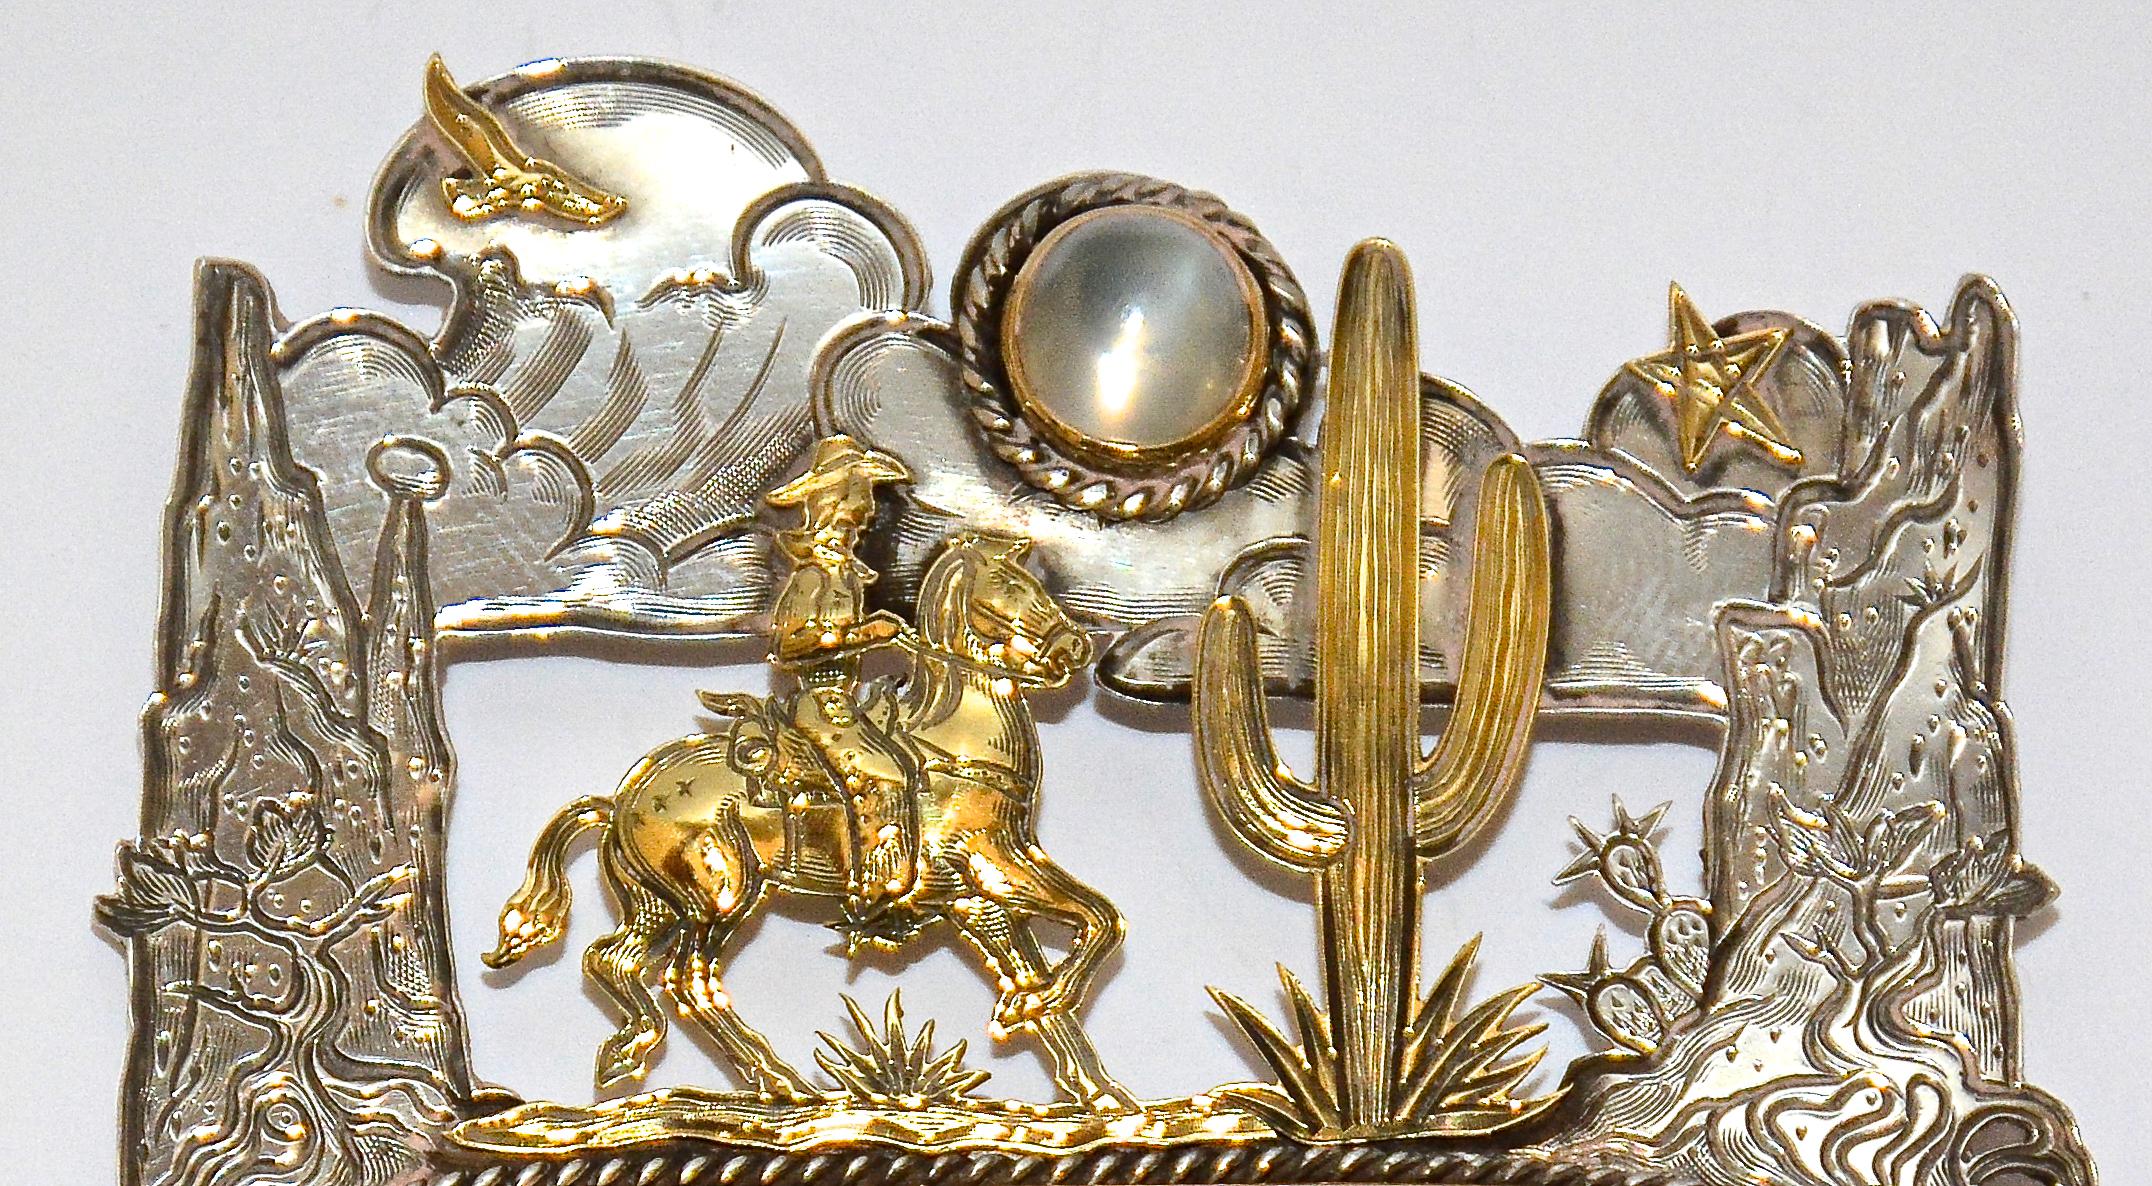 'Moonlight Ride' is an intricately engraved vintage art jewelry pin in sterling silver and 18k gold by renown jeweler and sculptor Kit Carson. 

This wonderful one-of-a-kind engraved narrative work depicting popular icons of the American Southwest